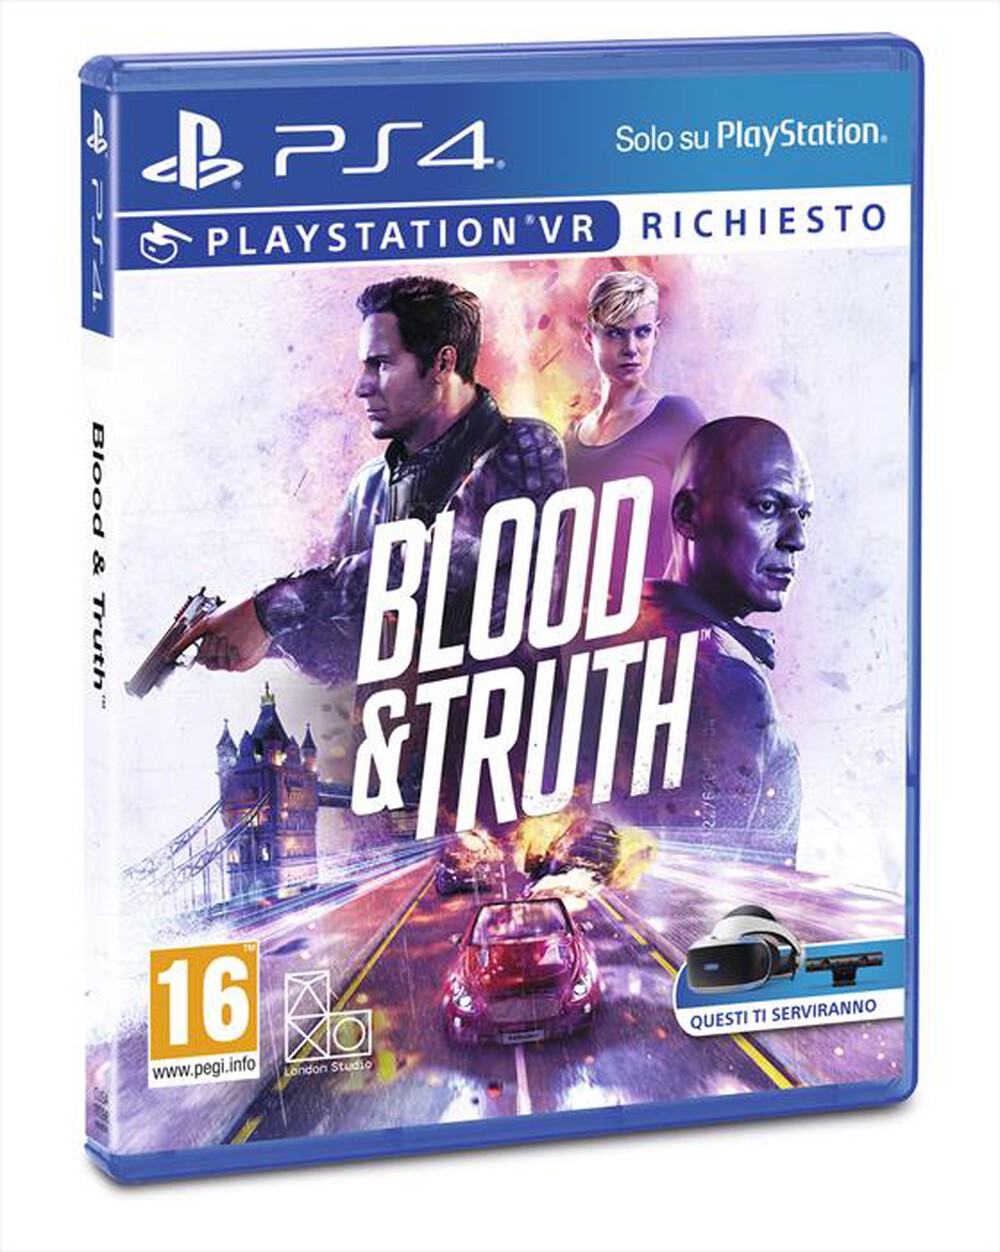 "SONY COMPUTER - BLOOD & TRUTH PS4"